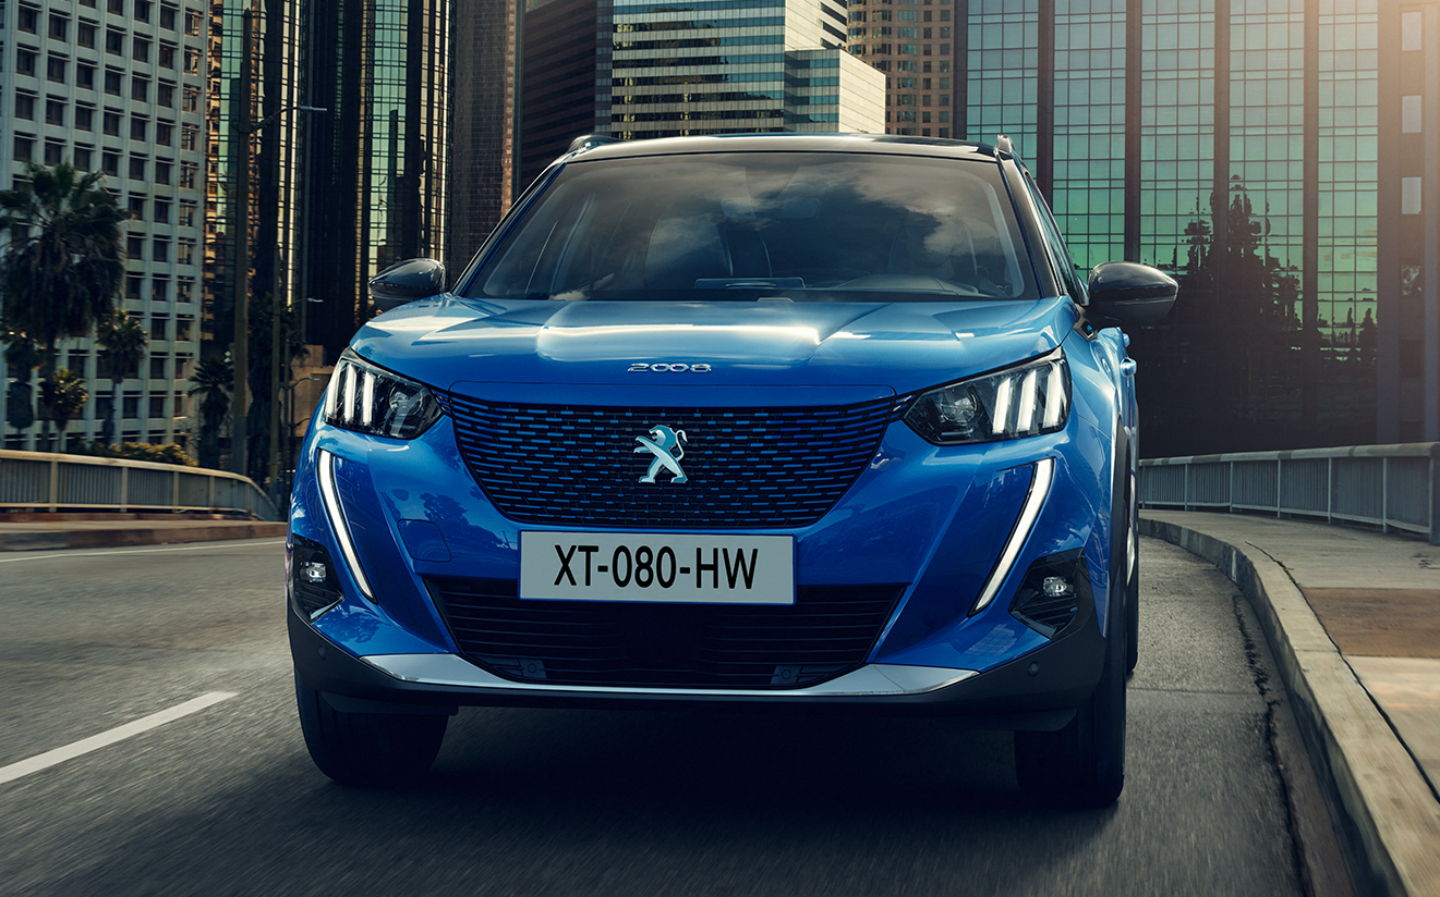 New Peugeot 2008 Revealed: Features and Specifications